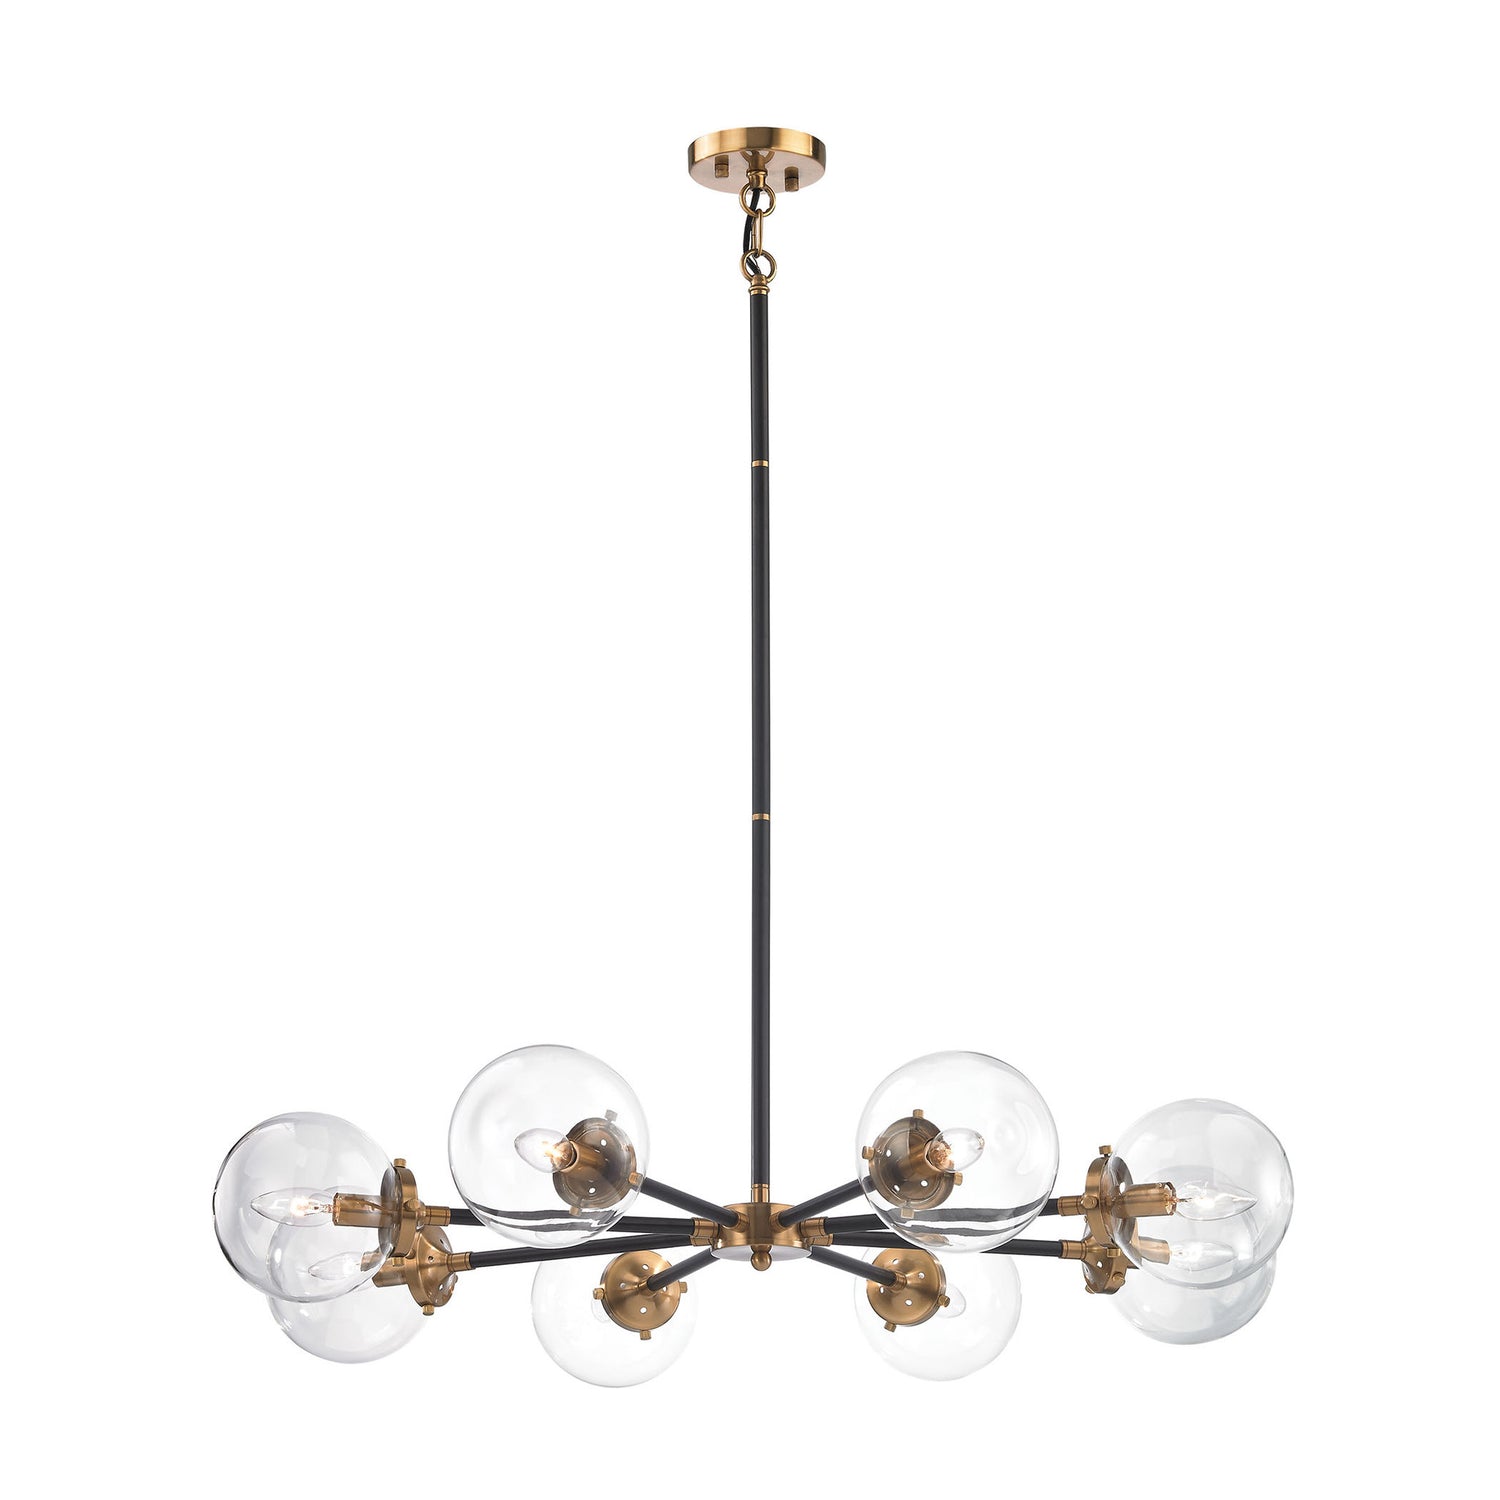 Mid-Century Modern 8 Light Nyx Chandelier in Matte Black and Antique Gold with Clear Glass Globe Shades 